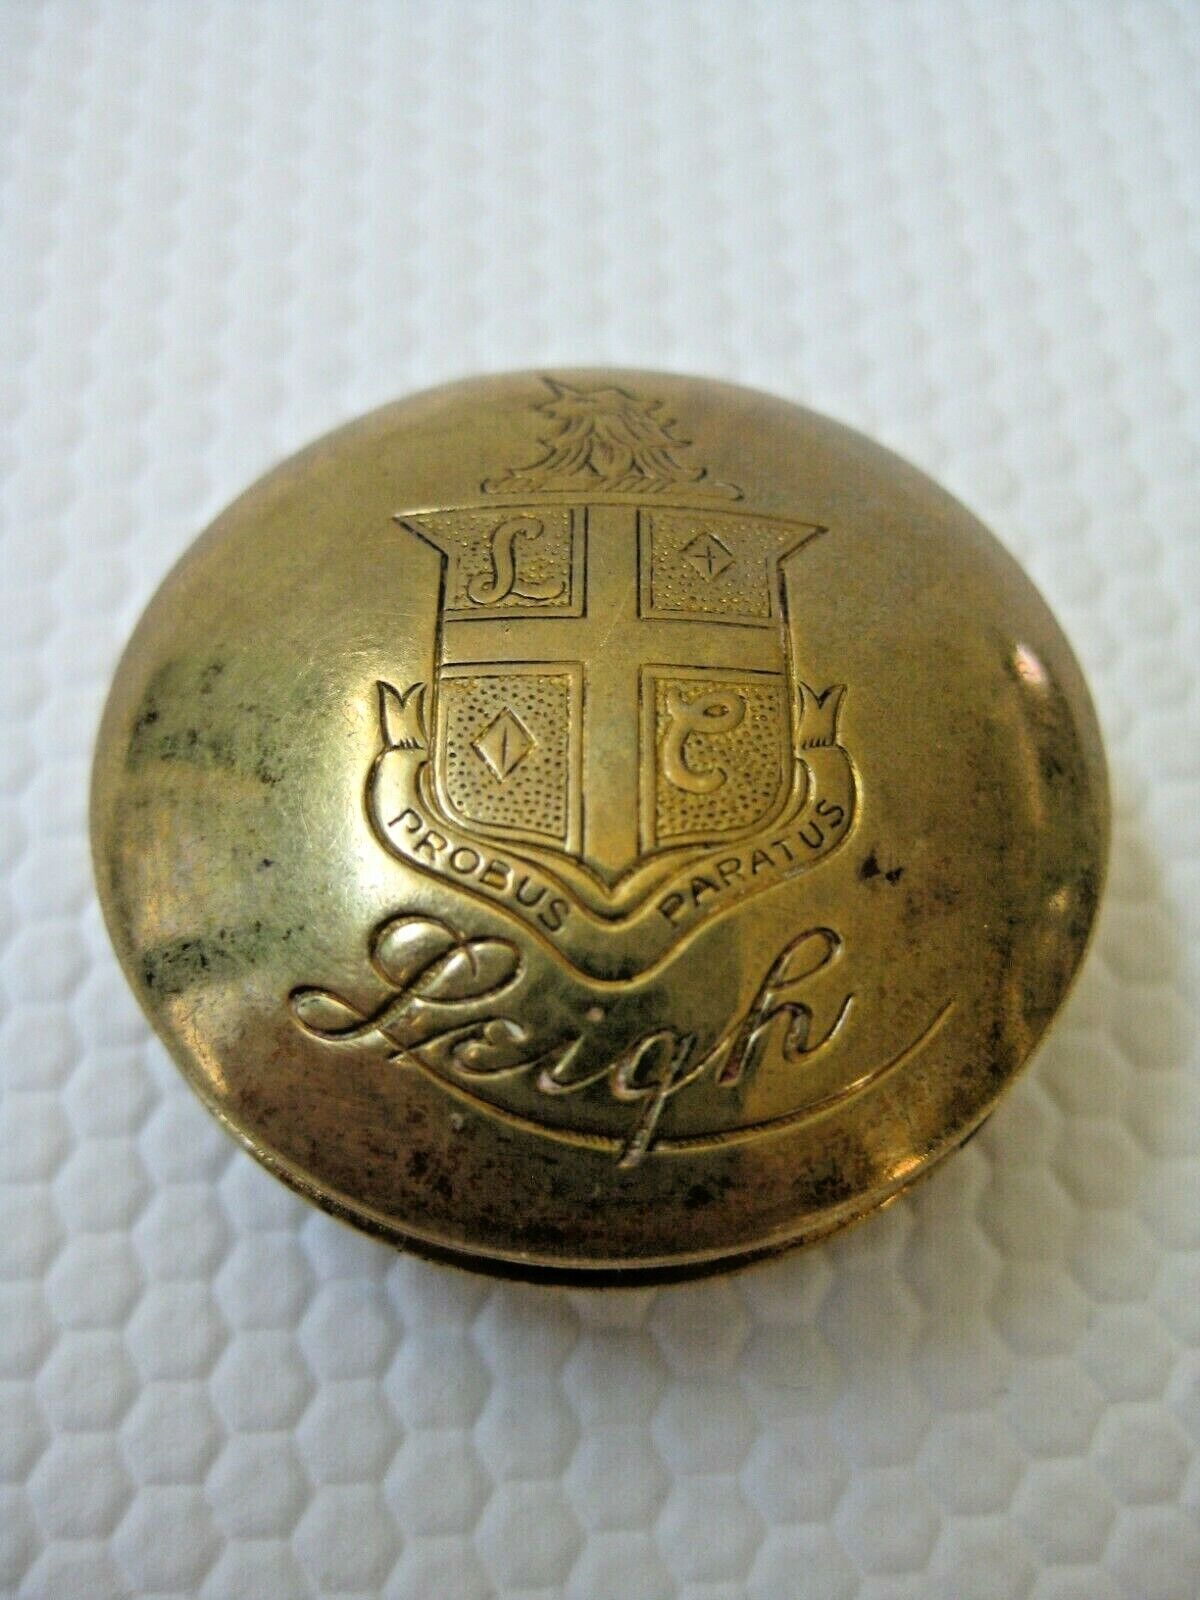 RARE 1920s Leigh Probus Paratus Rouge Compact Pot Brass Incised Trademark Crest 